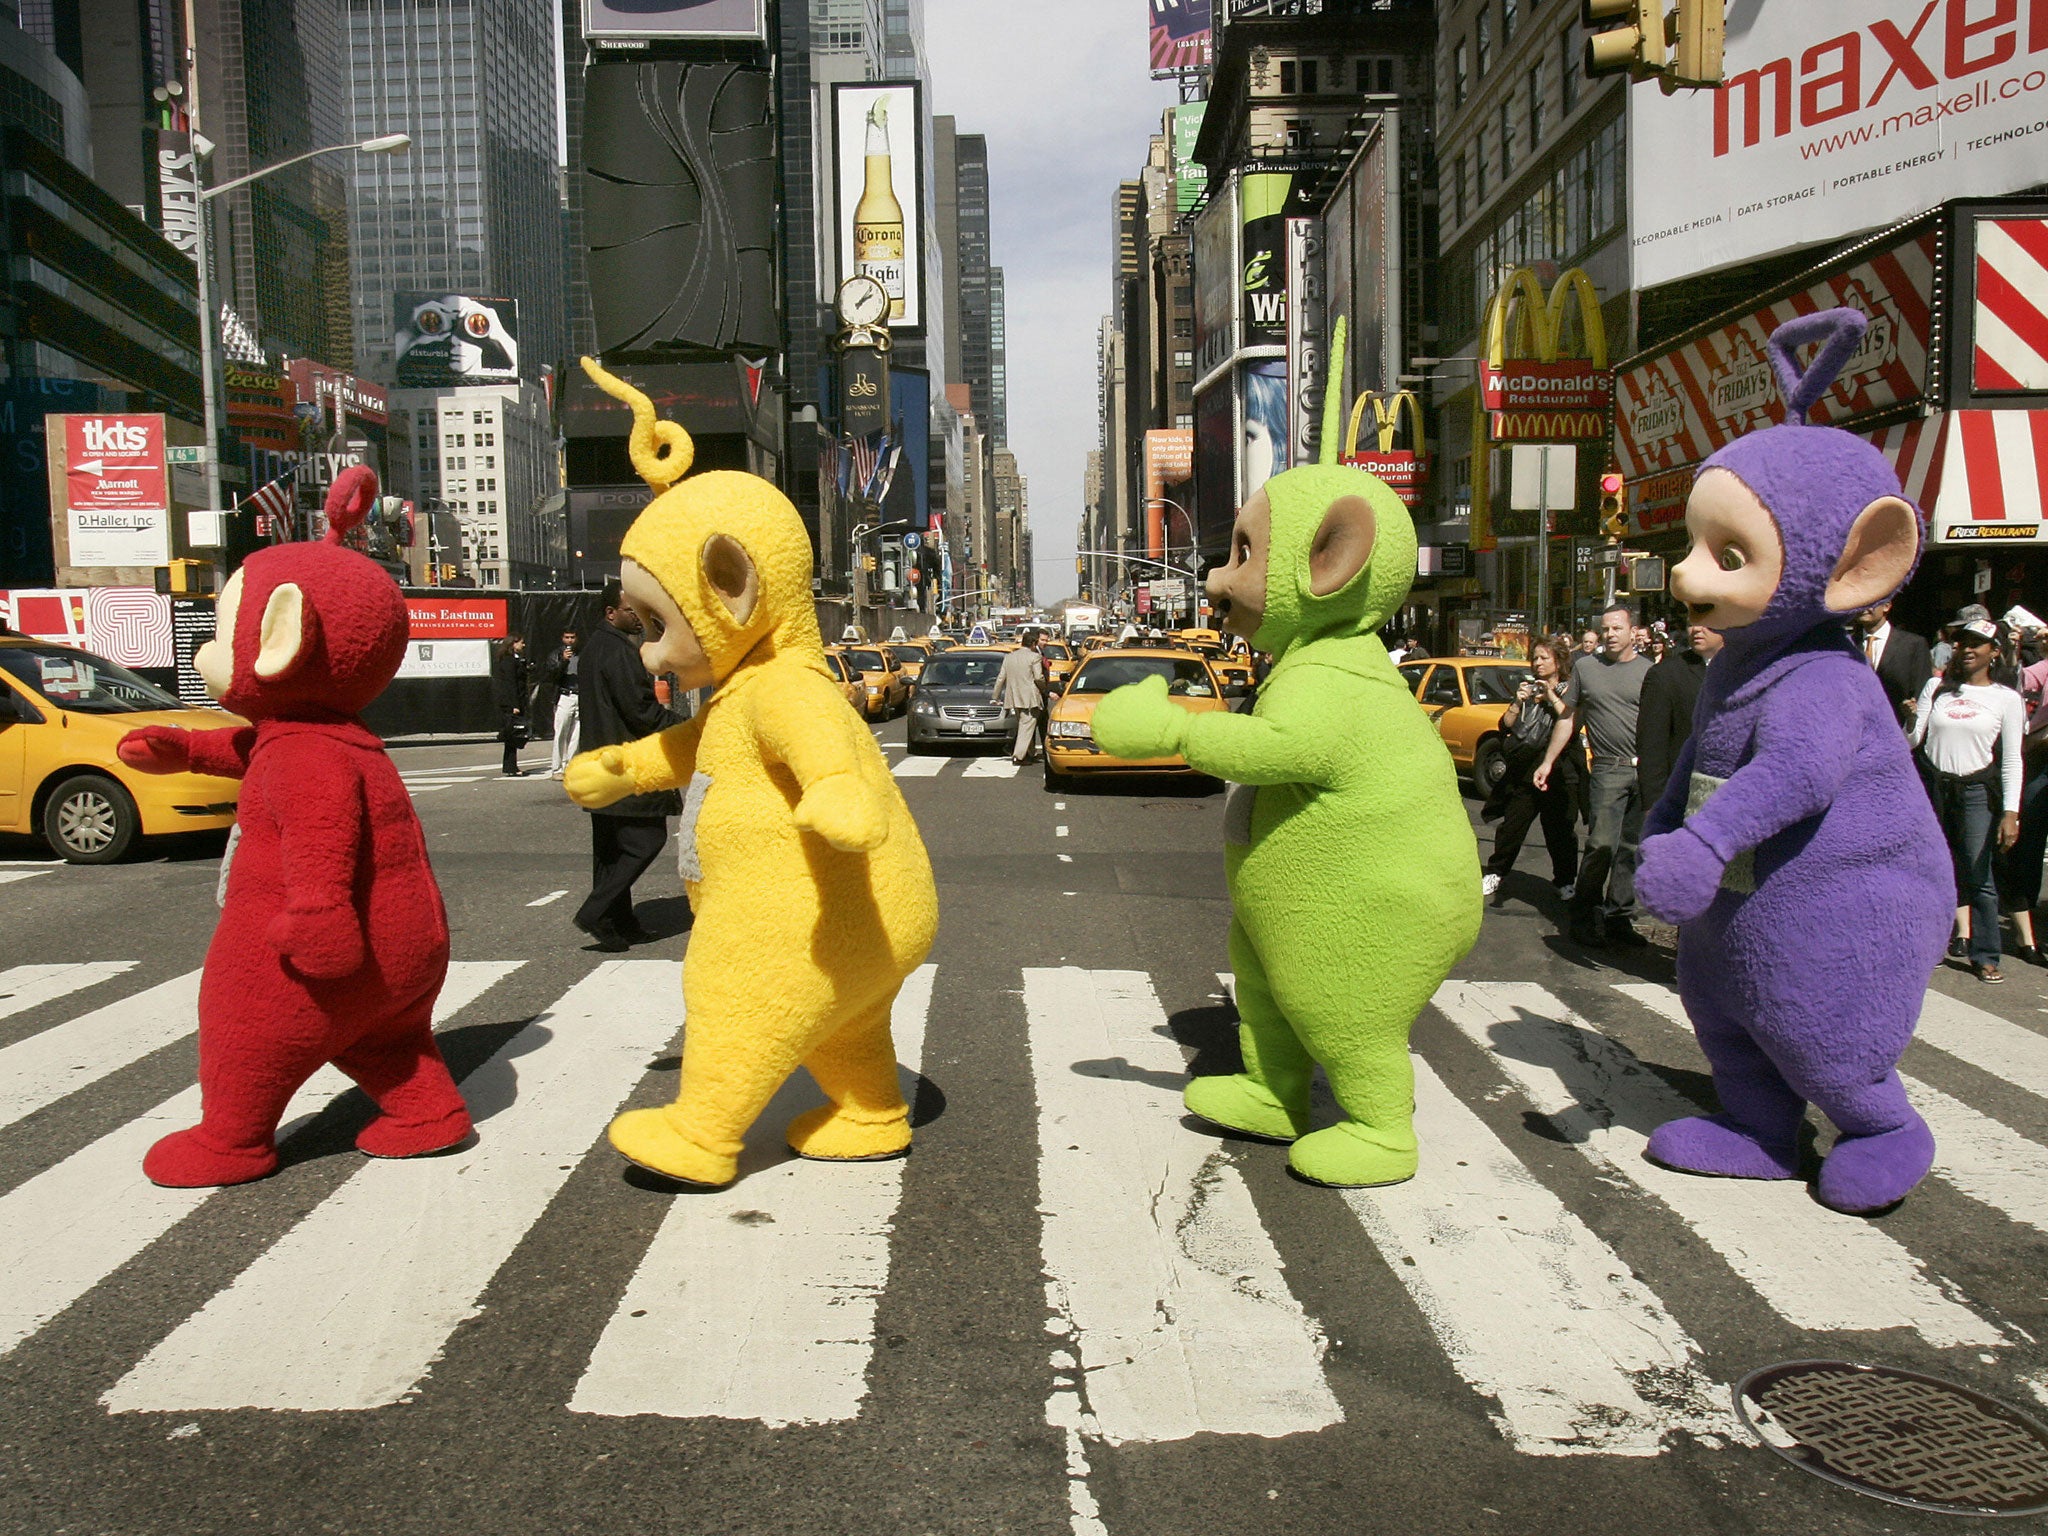 The world famous Teletubbies (L-R) Po, Laa-Laa, Dipsy and Tinky-Winky cross 7th Avenue in Times Square in New York 27 March 2007 as they arrive on American soil in person for the first time ever.